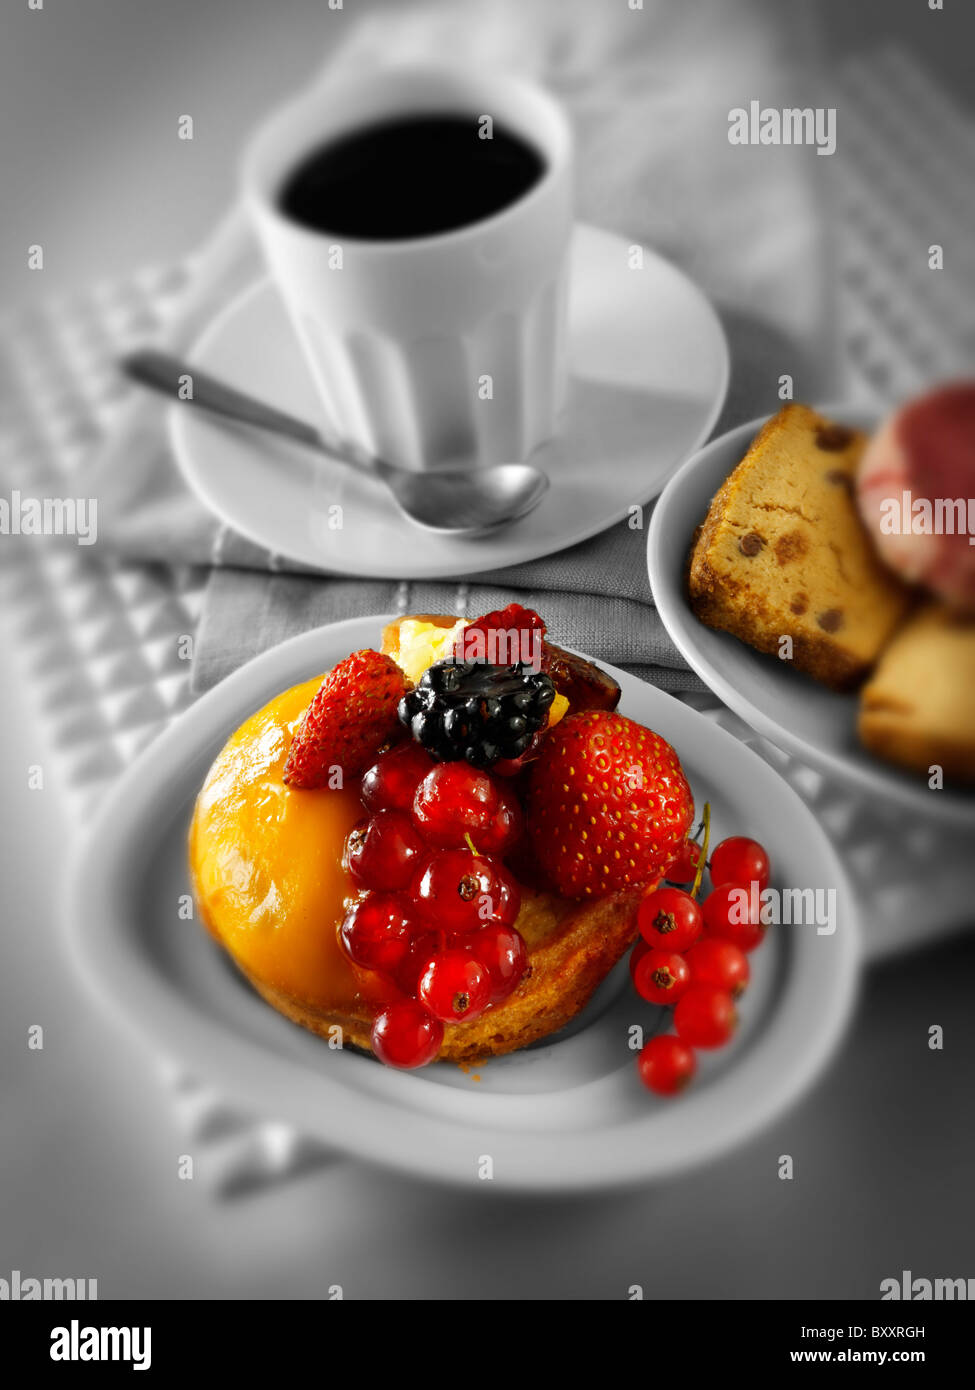 fresh fruit individual cakes with red fruits Stock Photo